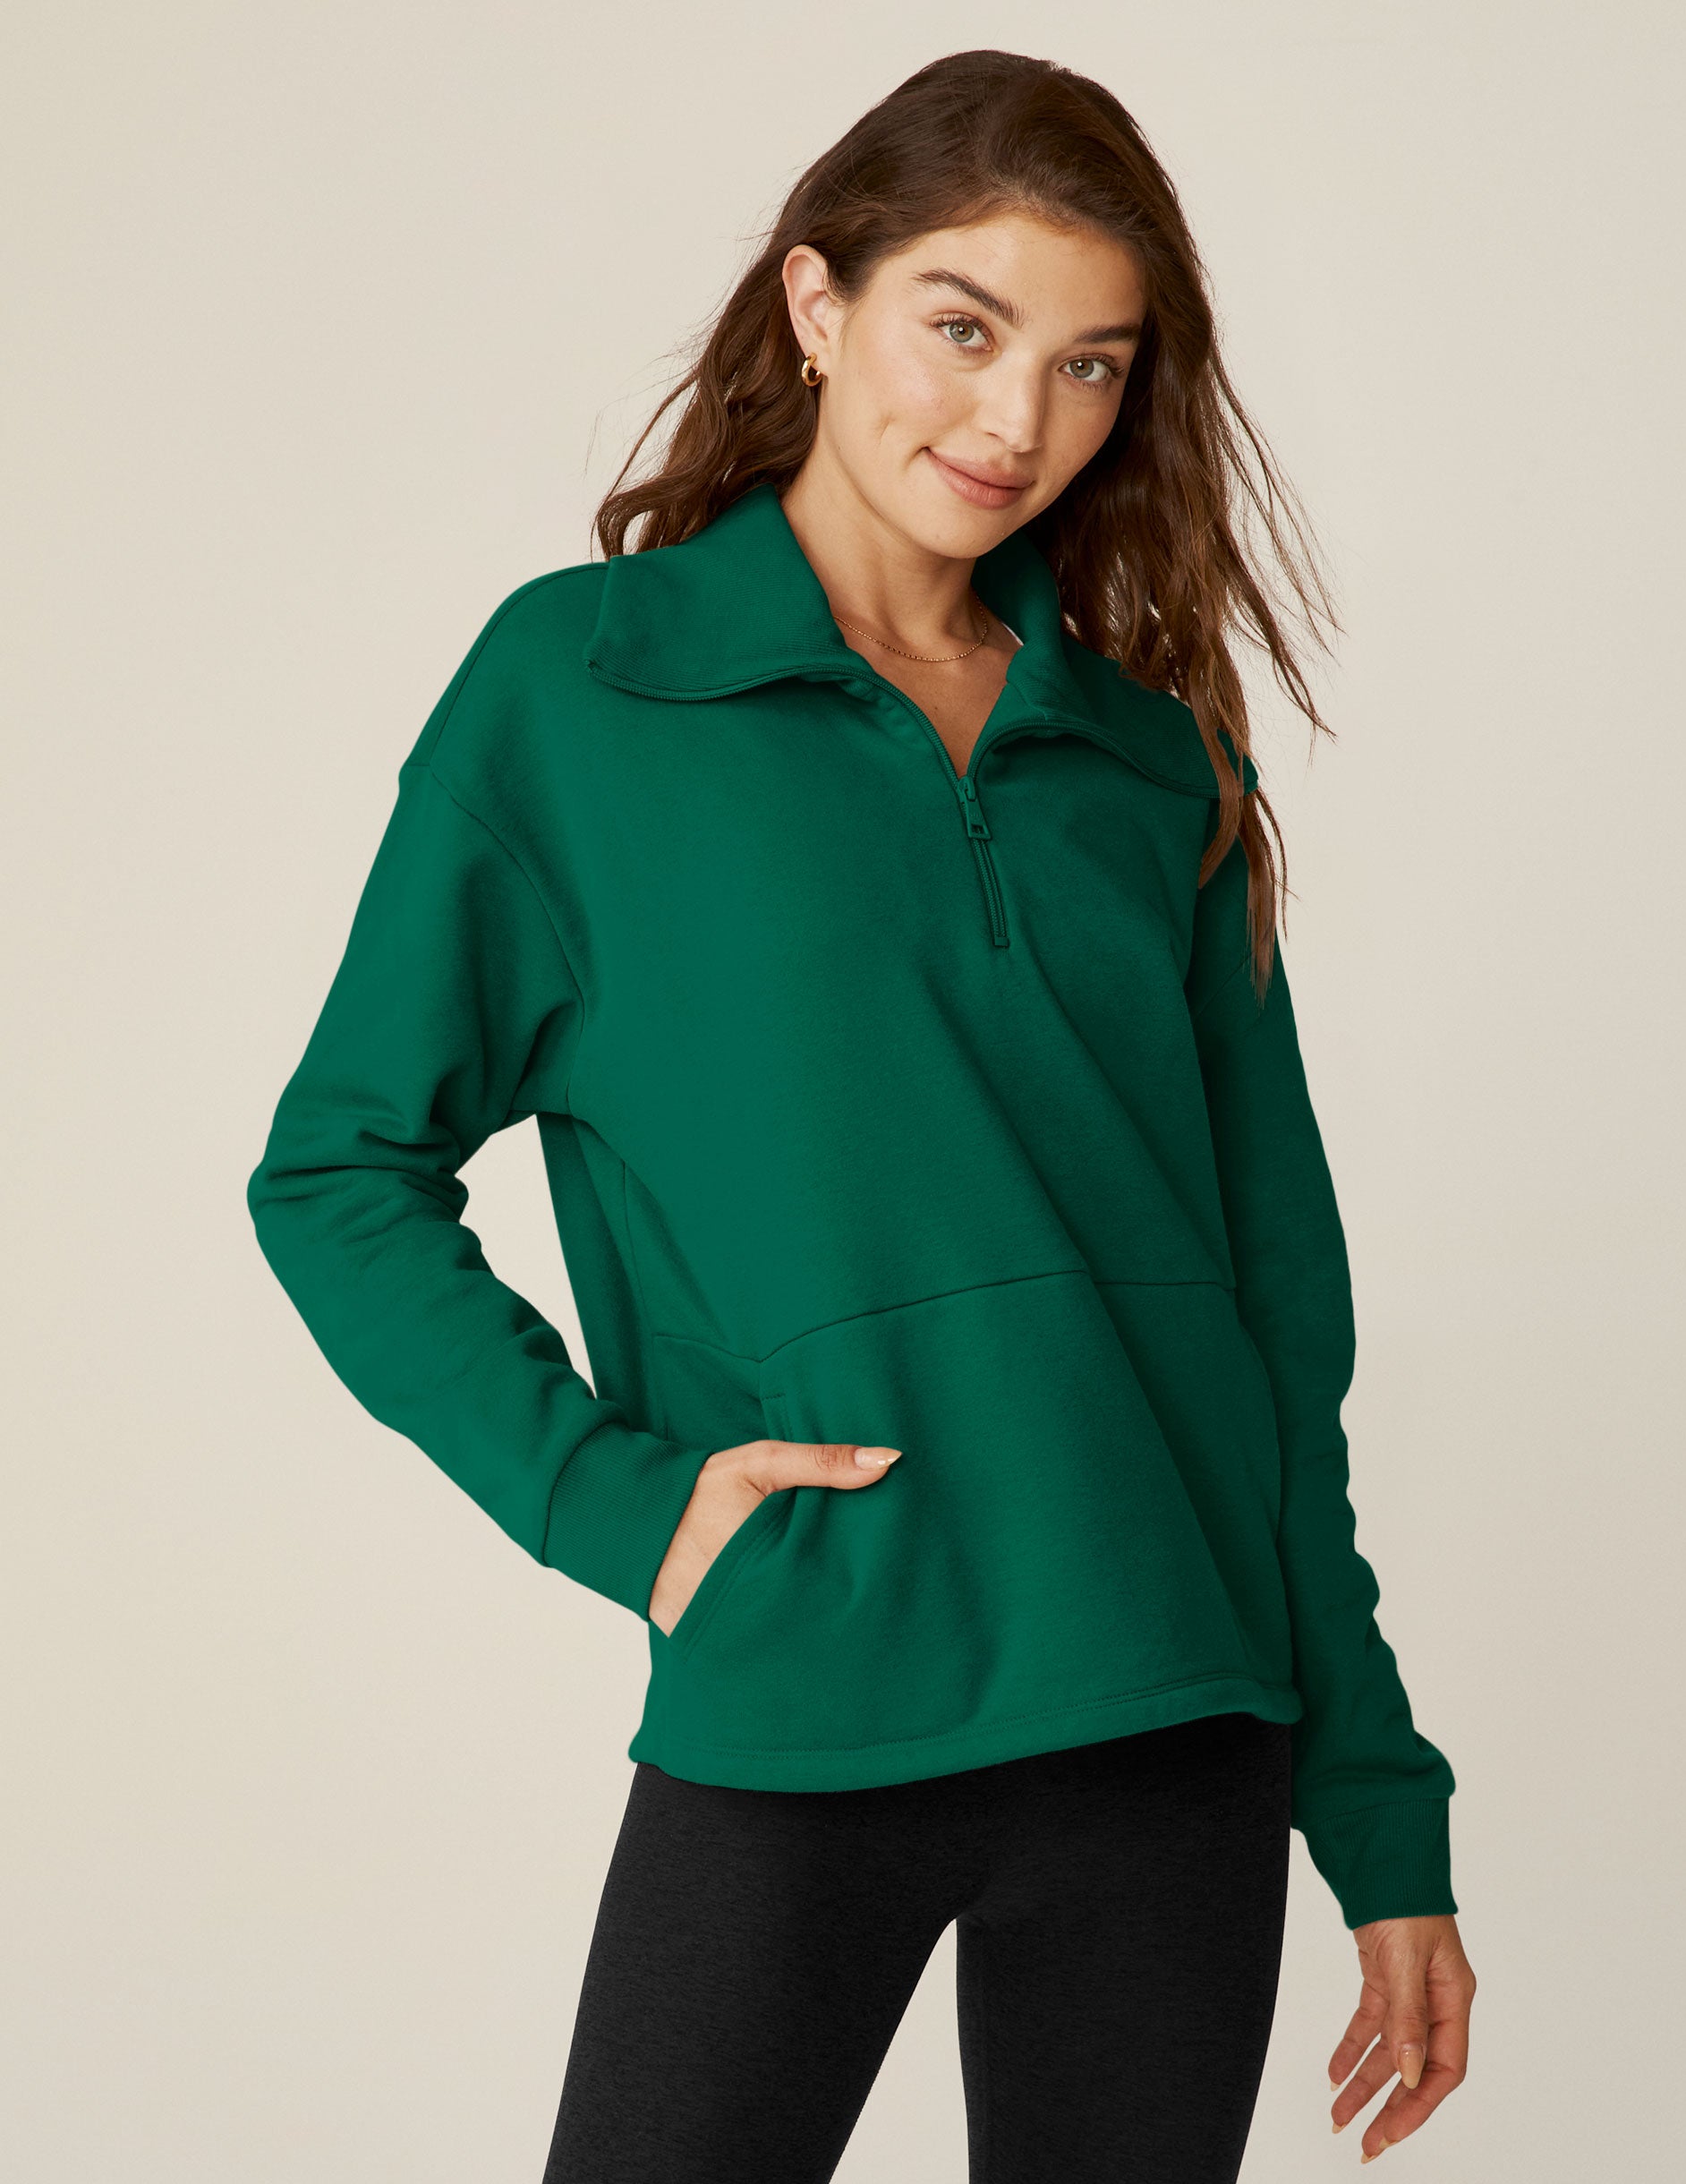 green quarter zip pullover jacket with a kangaroo pouch. 